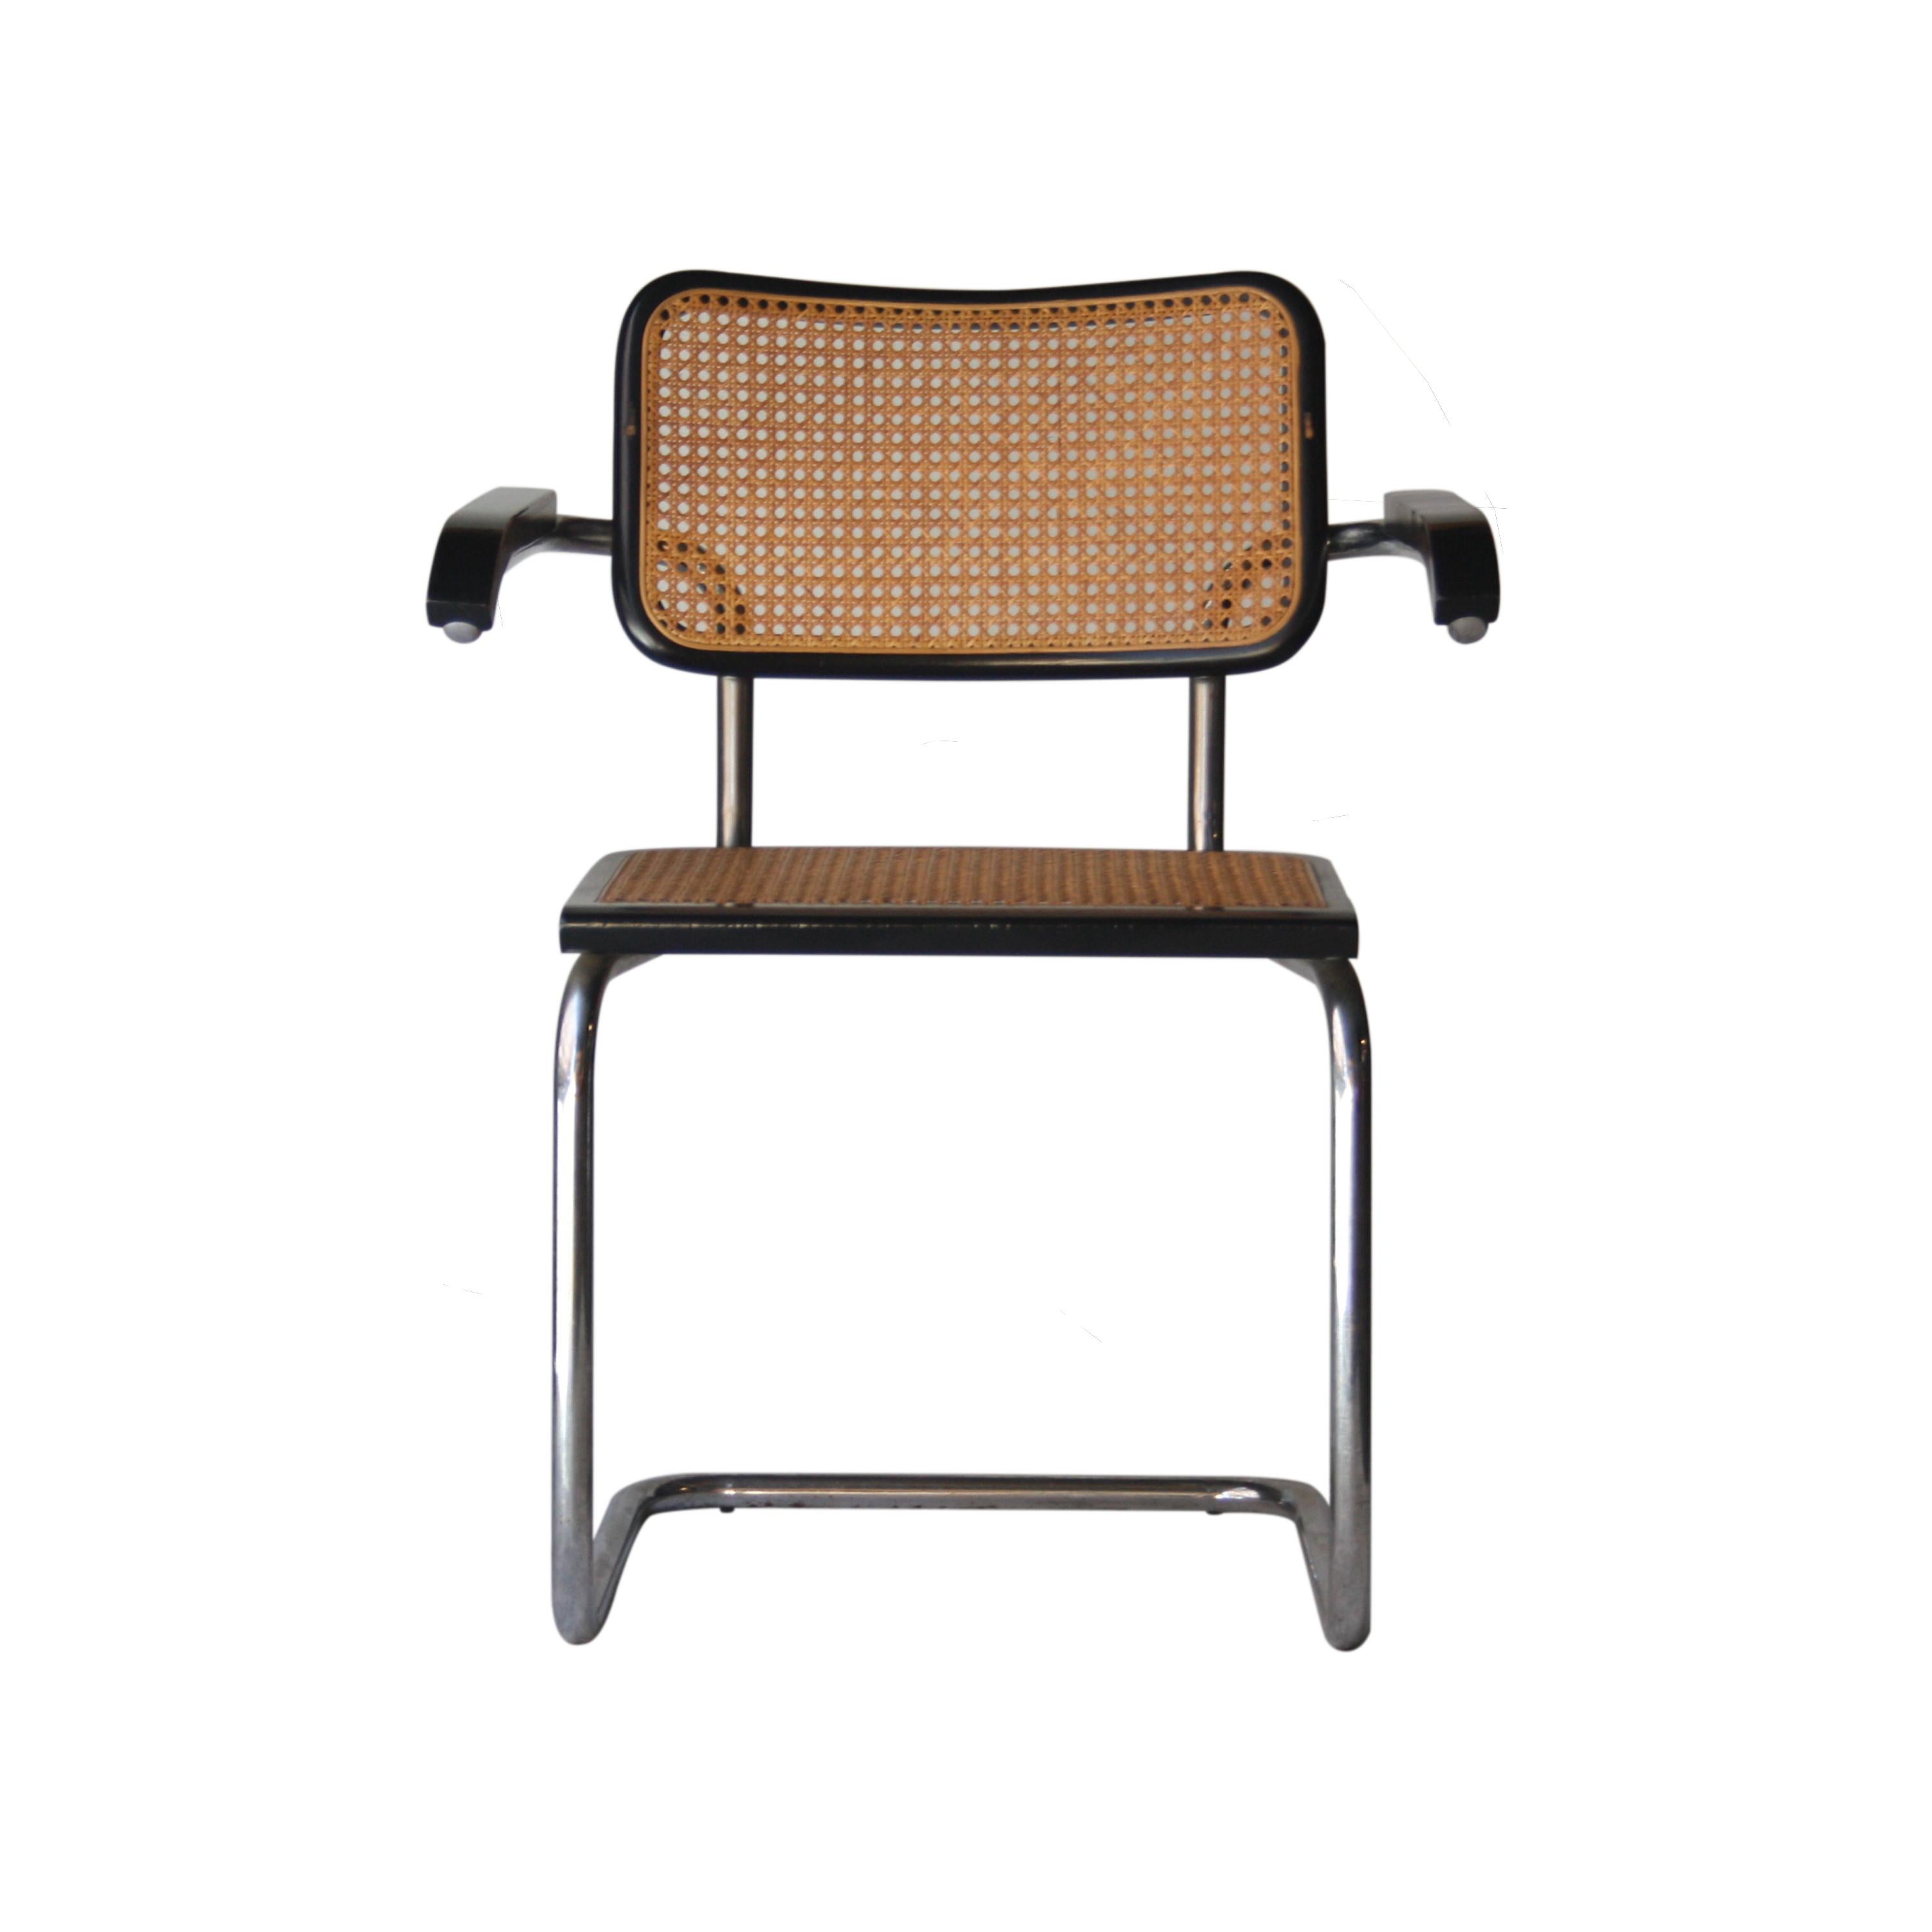 Set of 4 Cesca chairs designed by Marcel Breuer in 1962 and produced in Italy during de 1960s by Gavina. Chromed tubular structure, black lacquered wood frame with braided natural fiber seat and back.